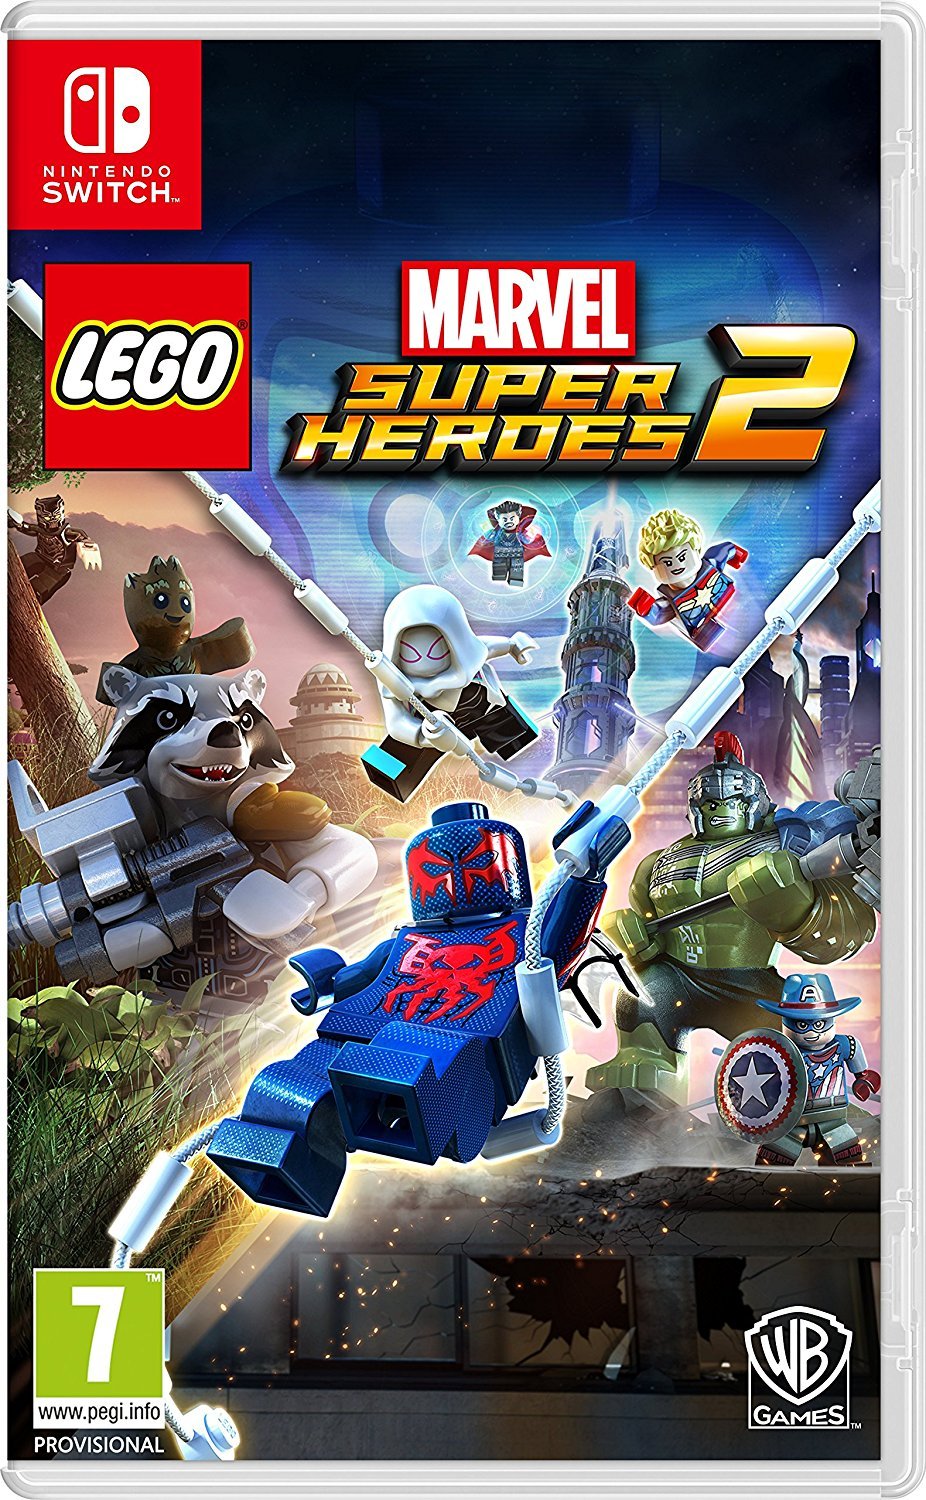 LEGO Marvel Super Heroes 2 Video Game (Nintendo Switch)